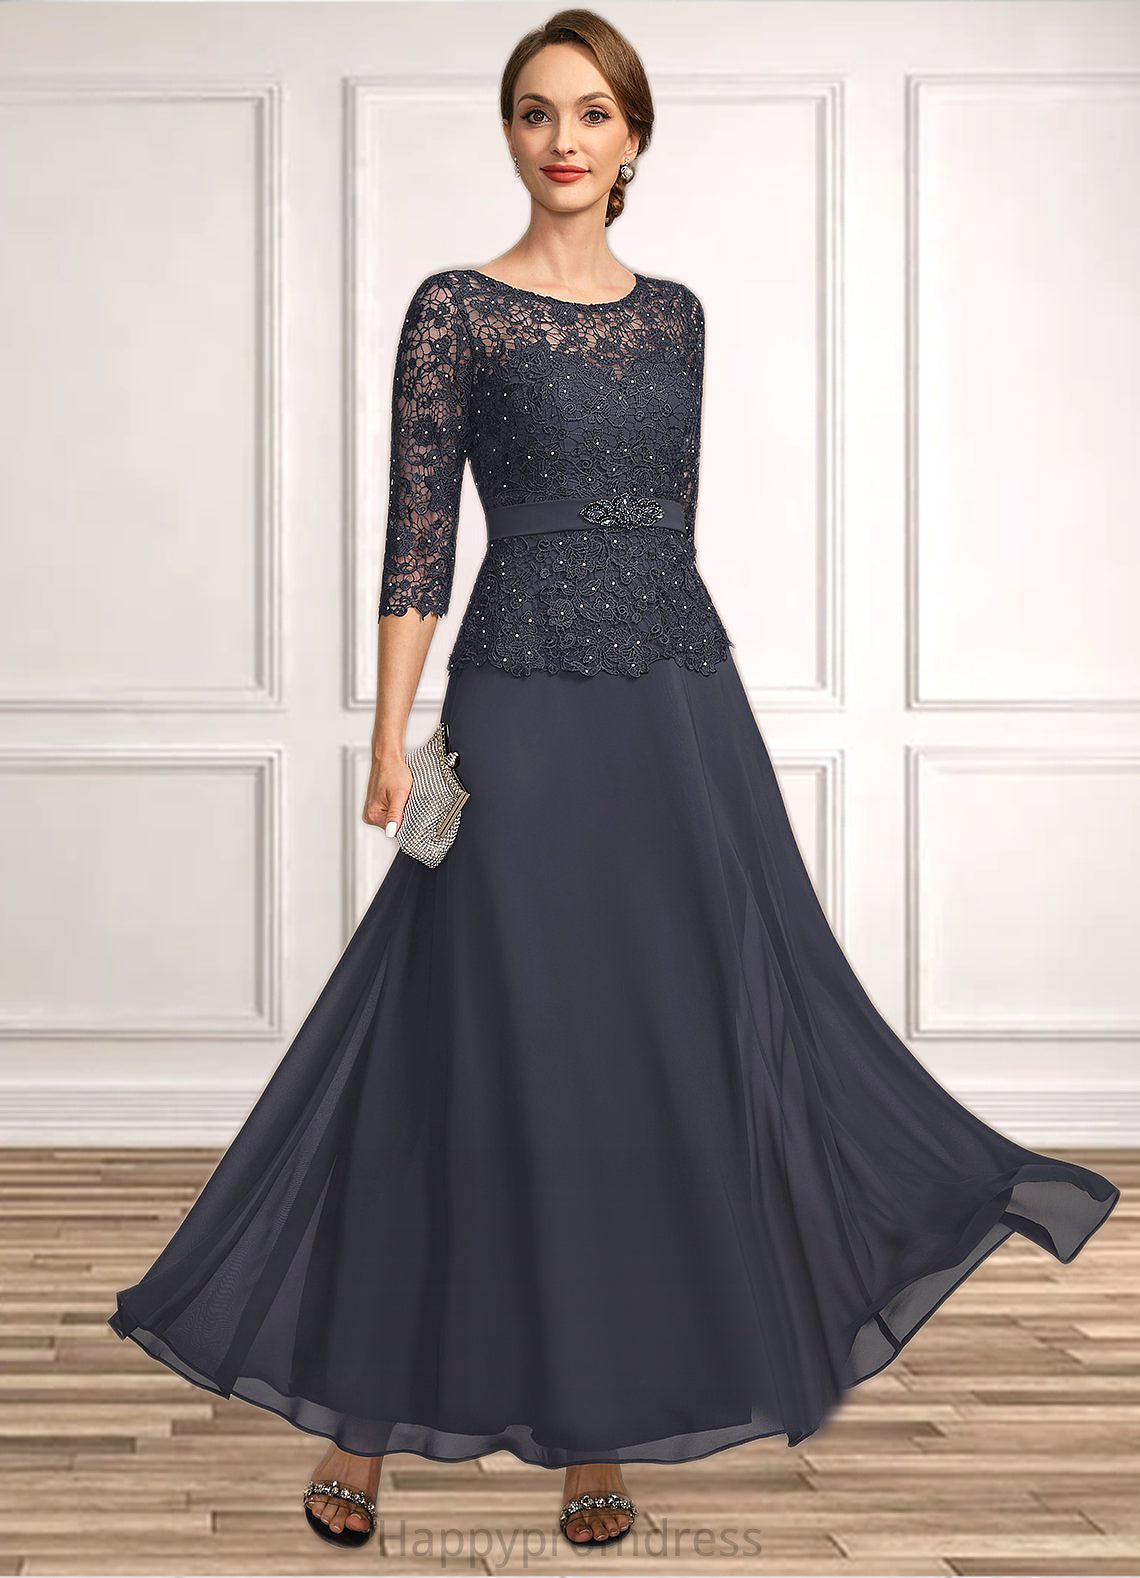 Shirley A-line Scoop Illusion Ankle-Length Chiffon Lace Mother of the Bride Dress With Beading Rhinestone XXSP0021659